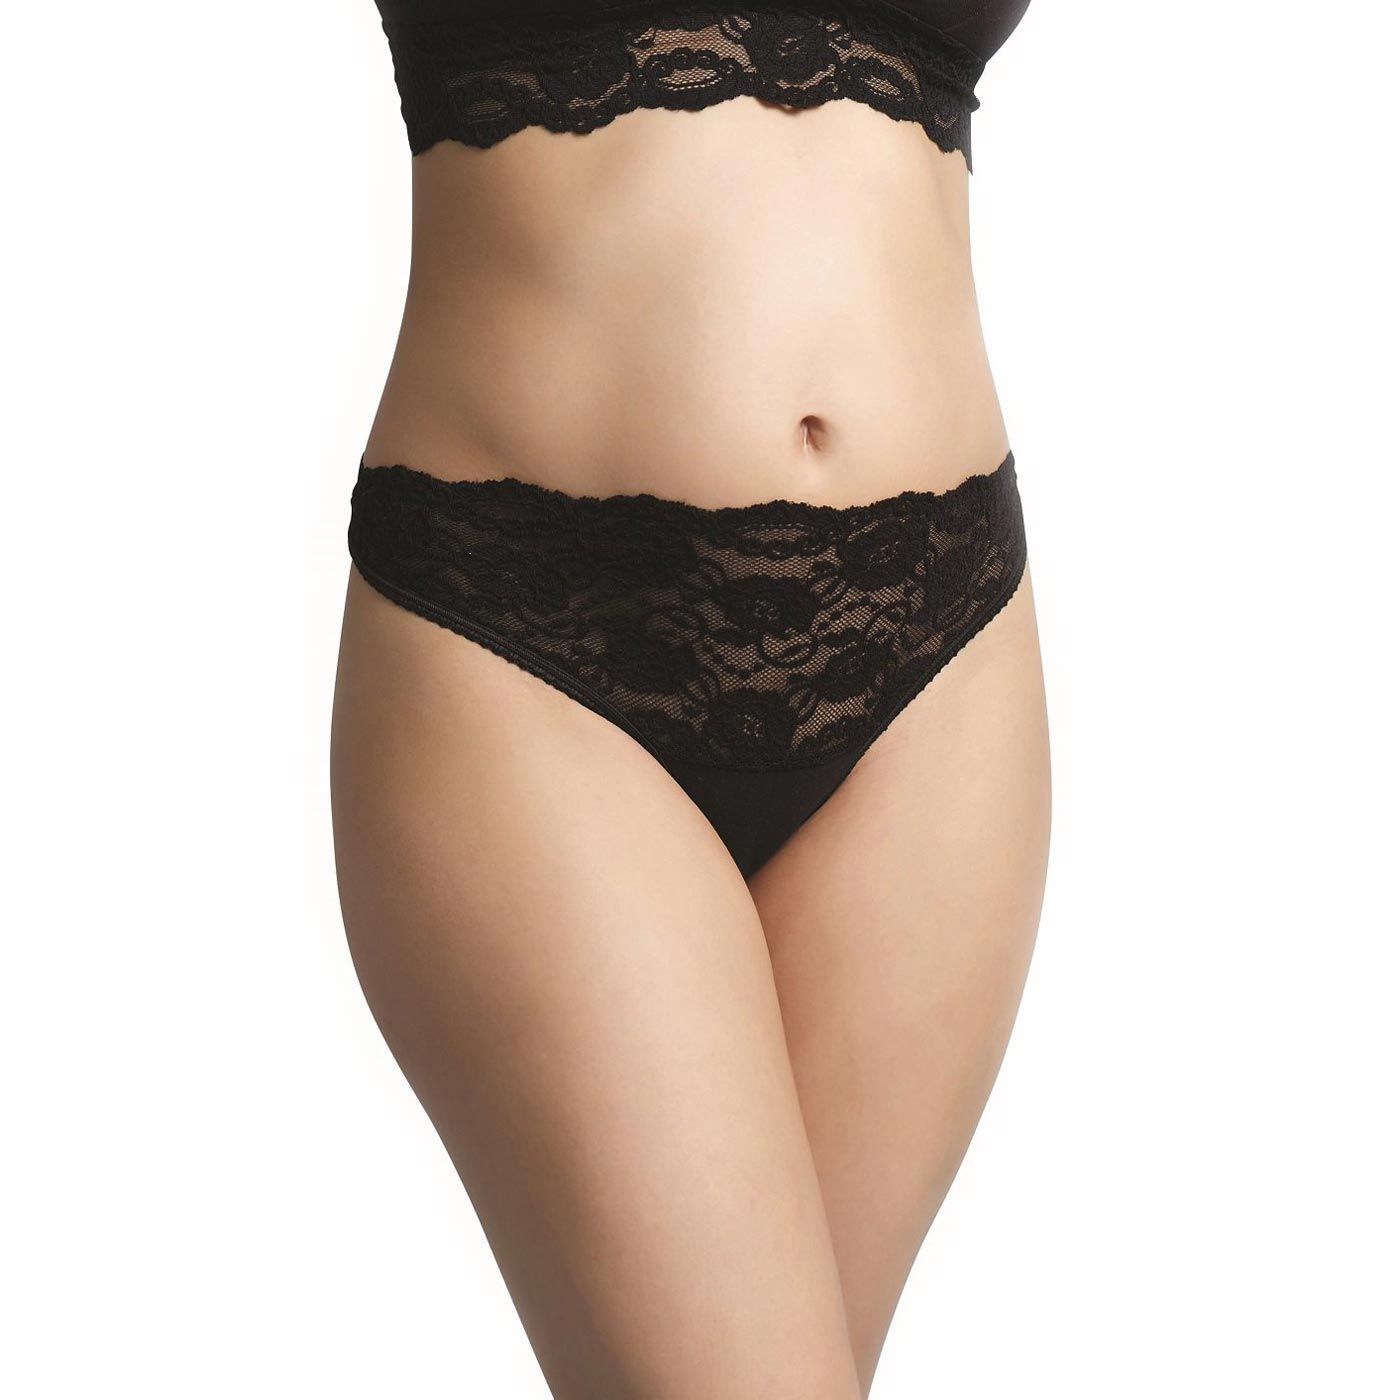 Carriwell Lace Stretch Panties-S-Black - 1